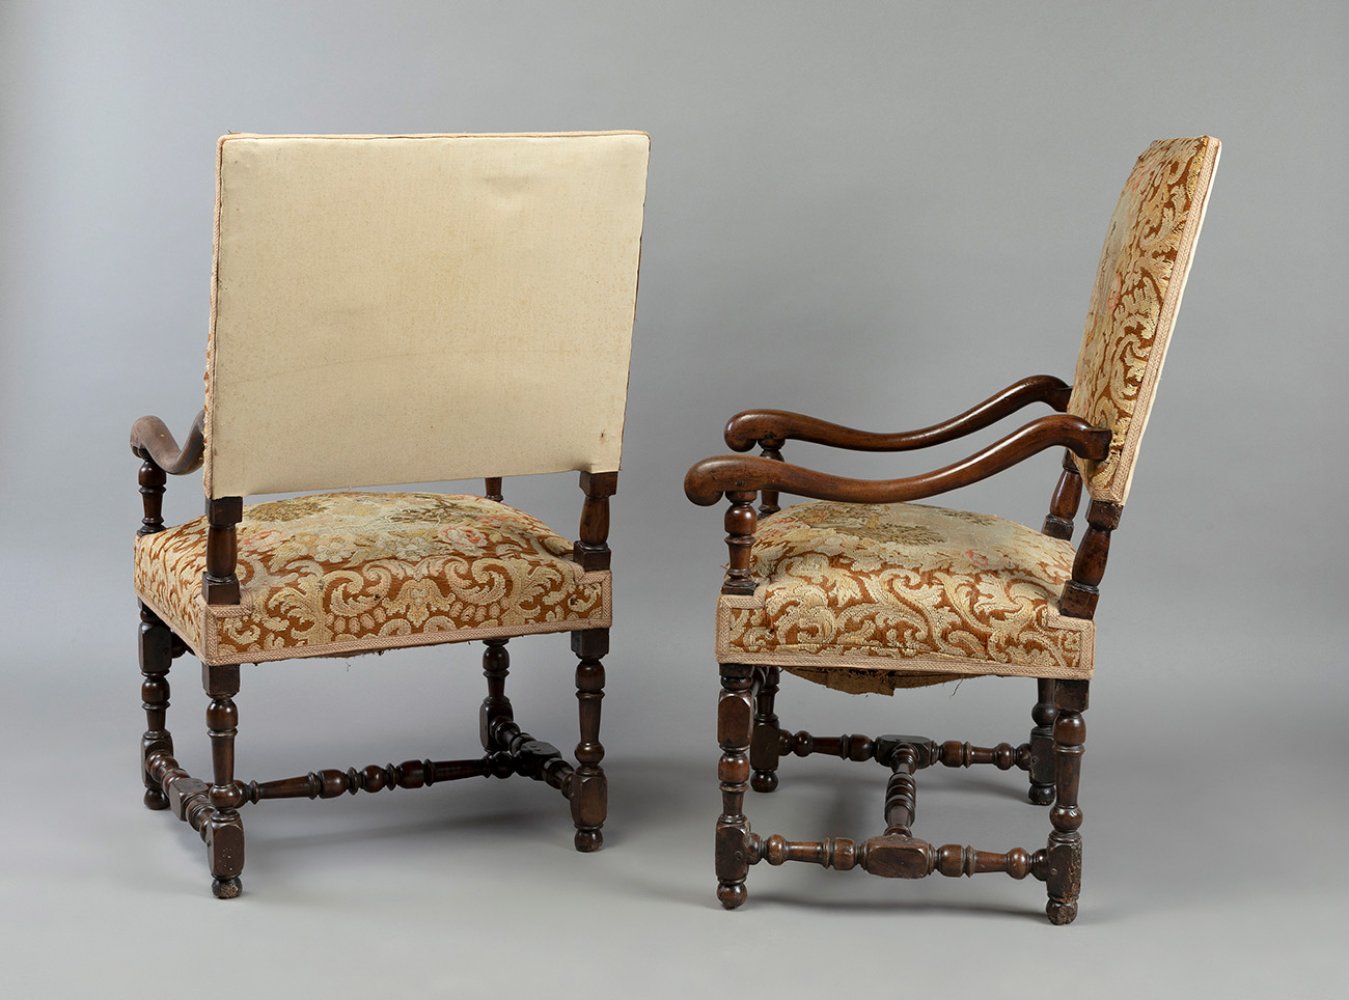 Pair of Louis XIV armchairs. France, 17th-18th century.Walnut wood and petit point upholstery.Use - Image 4 of 7